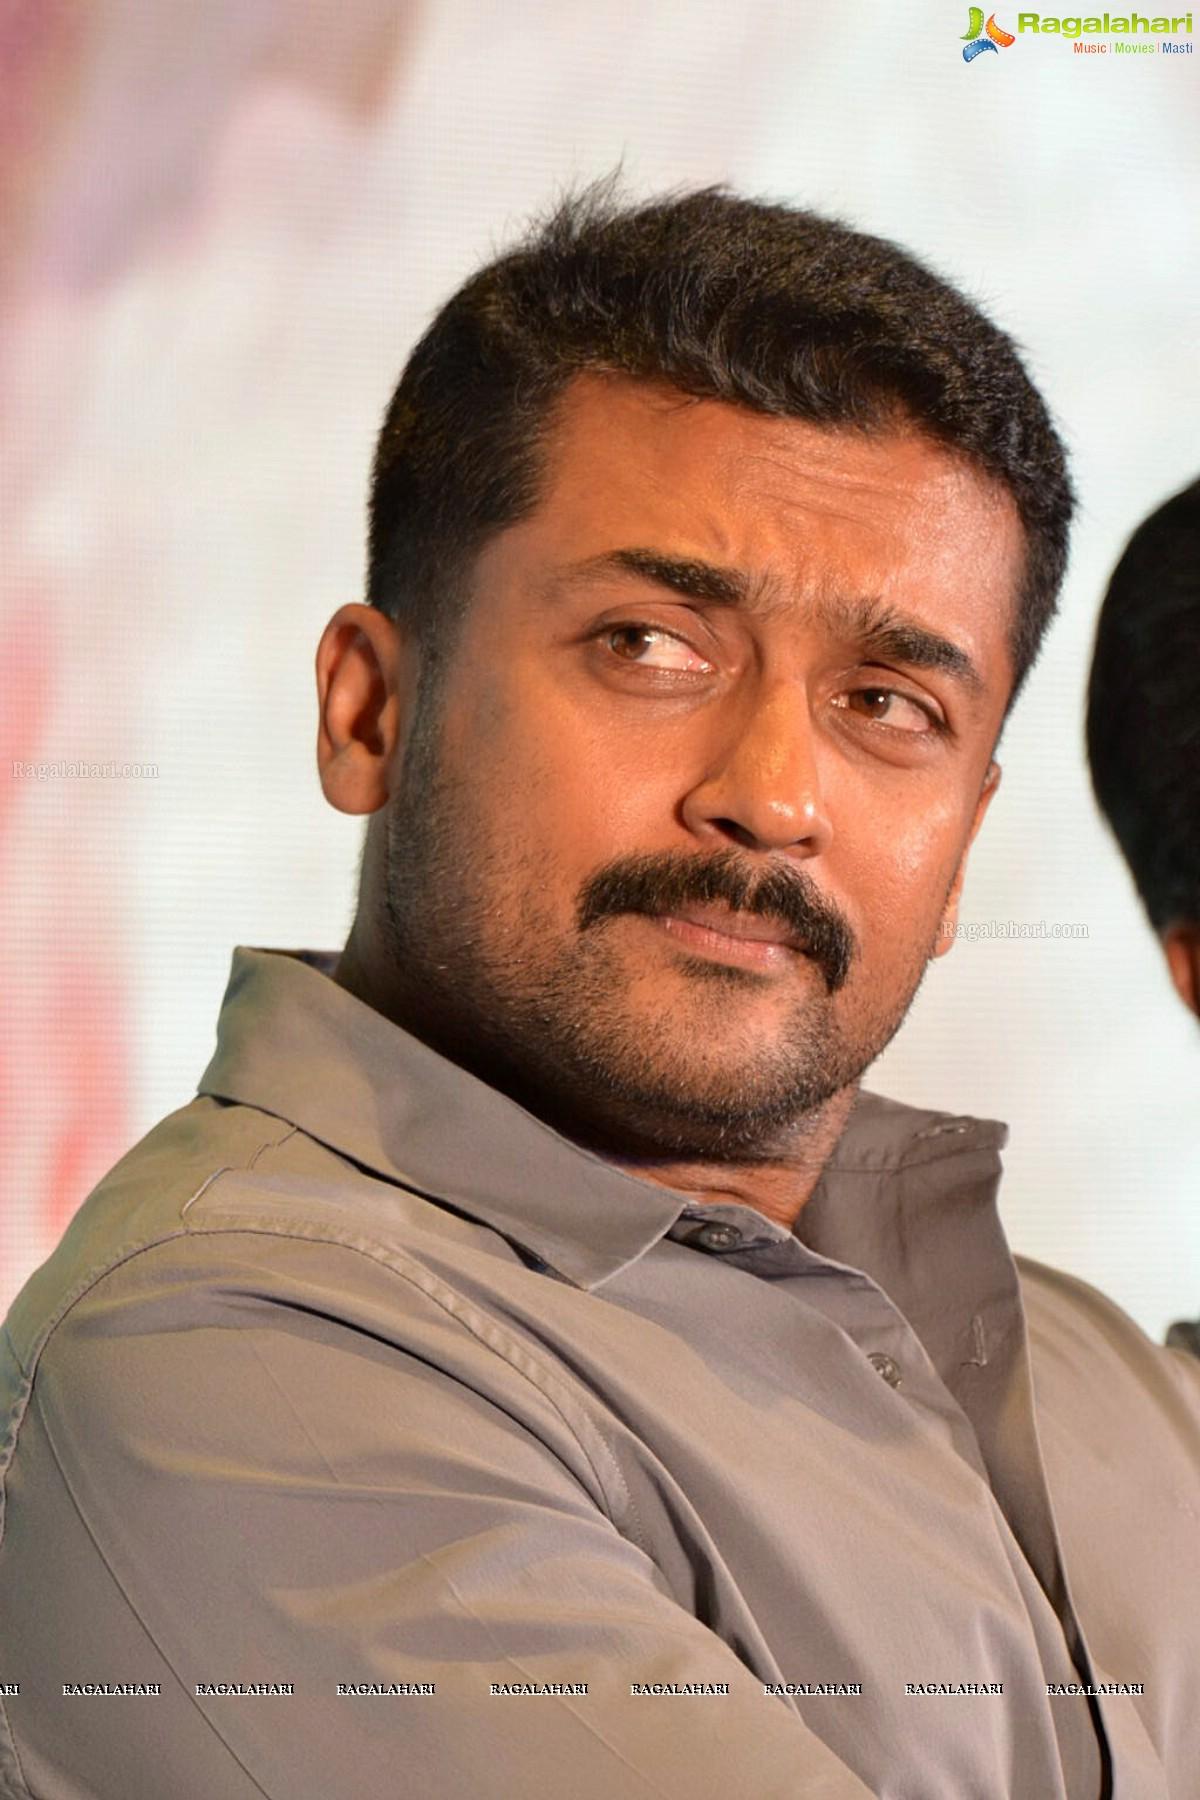 Surya at NGK Audio Launch Image 3. Latest Bollywood Actor